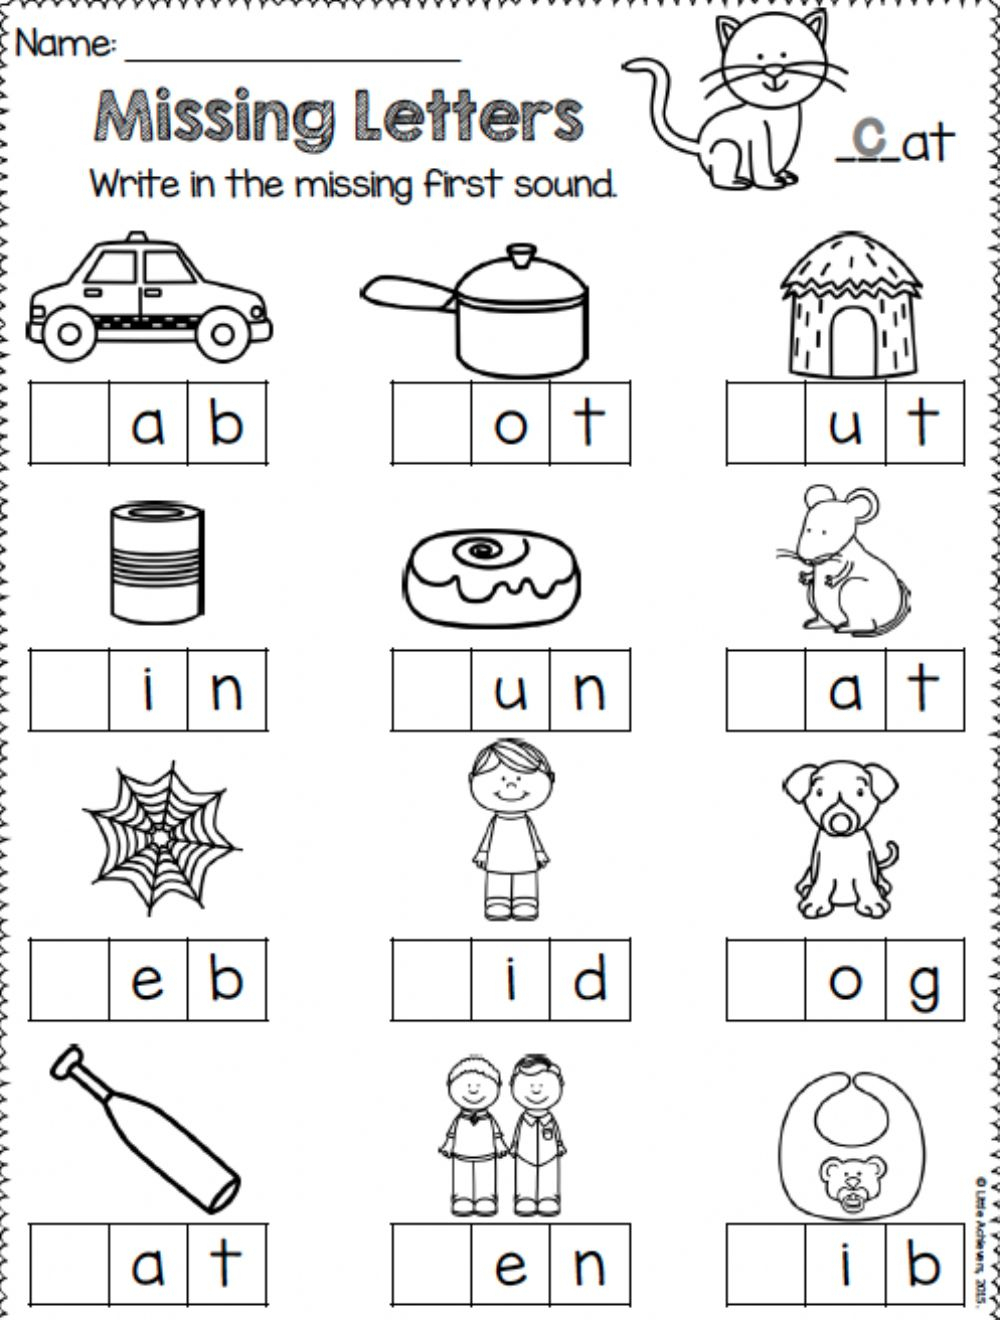 Missing Letters - Interactive Worksheet with regard to Alphabet Worksheets Missing Letters